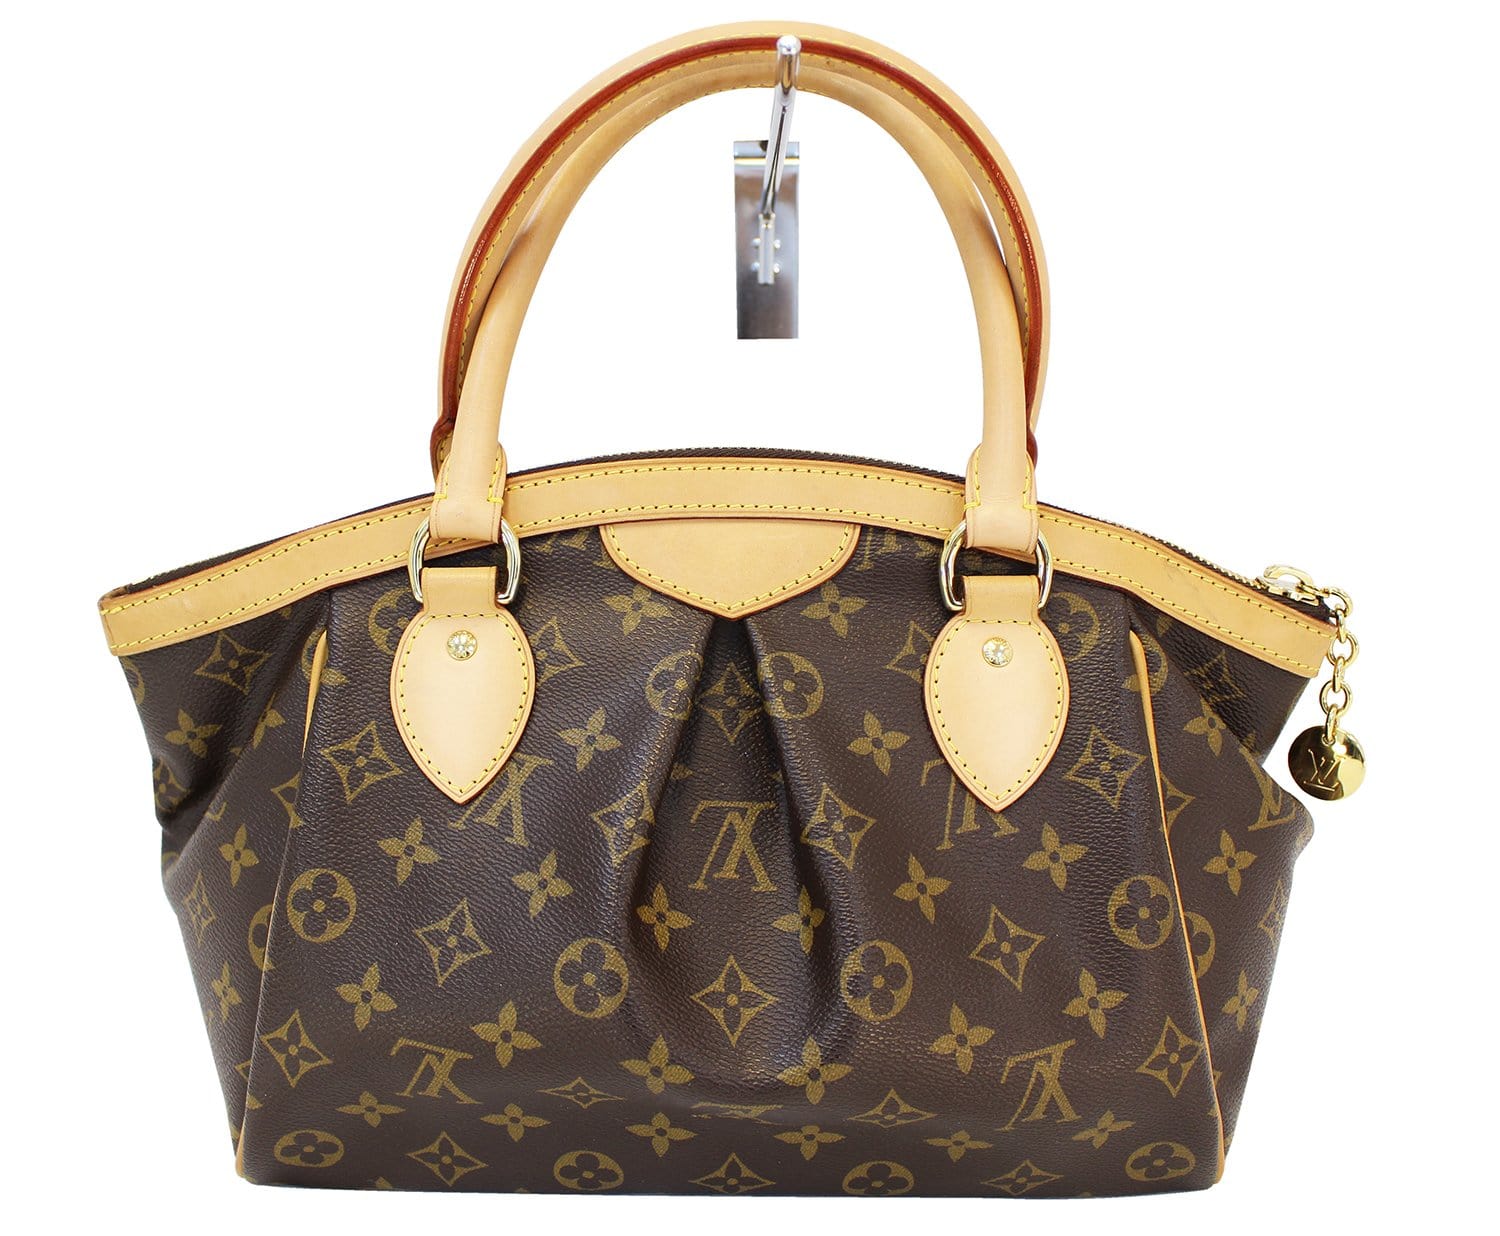 Luis Vuitton Tivoli PM - clothing & accessories - by owner - apparel sale -  craigslist